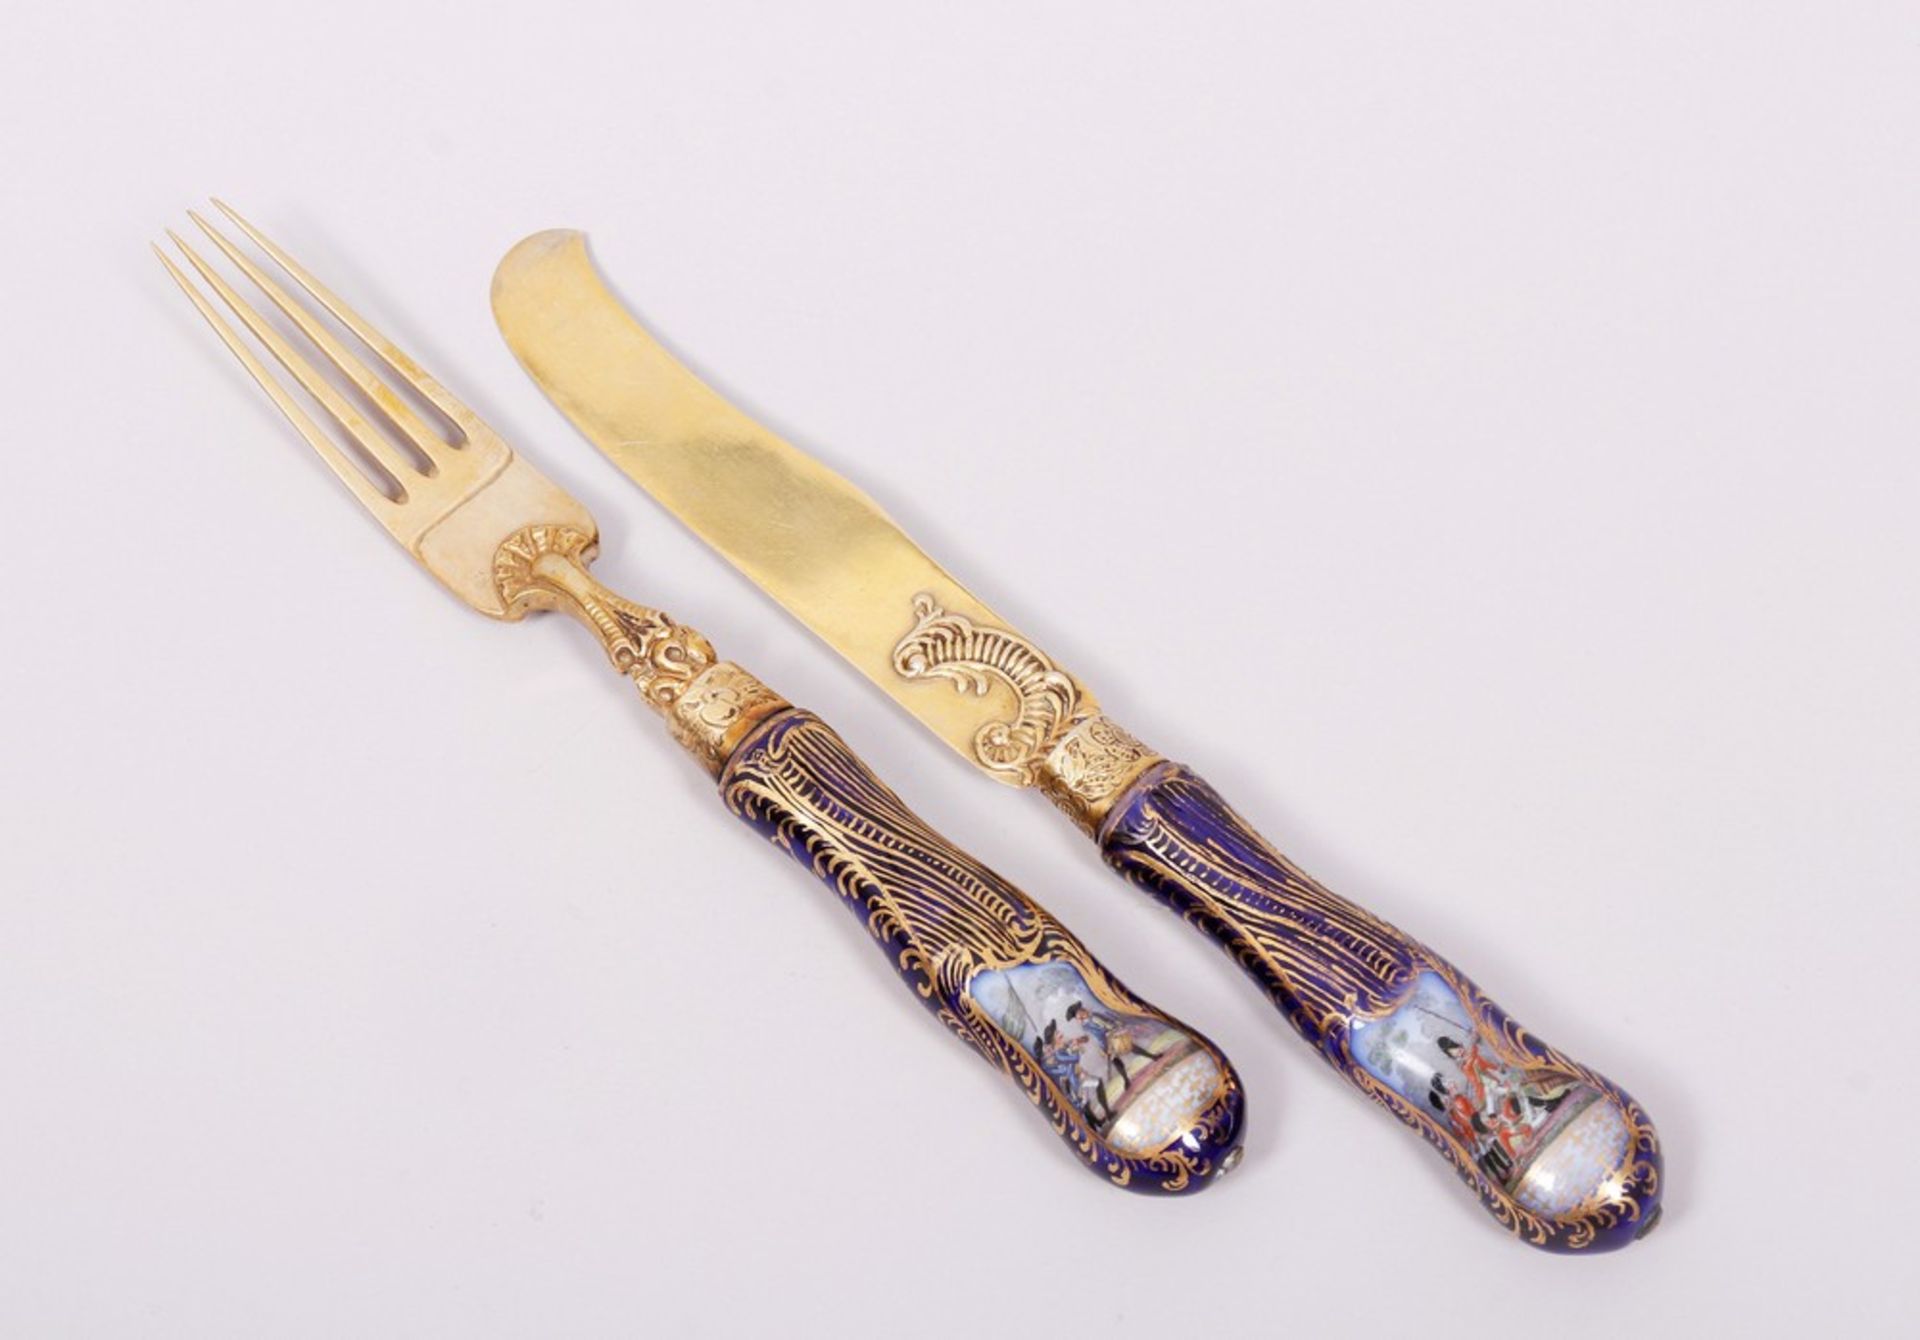 Late Baroque dining knife and fork, silver/gilt, probably German, mid-18th C.